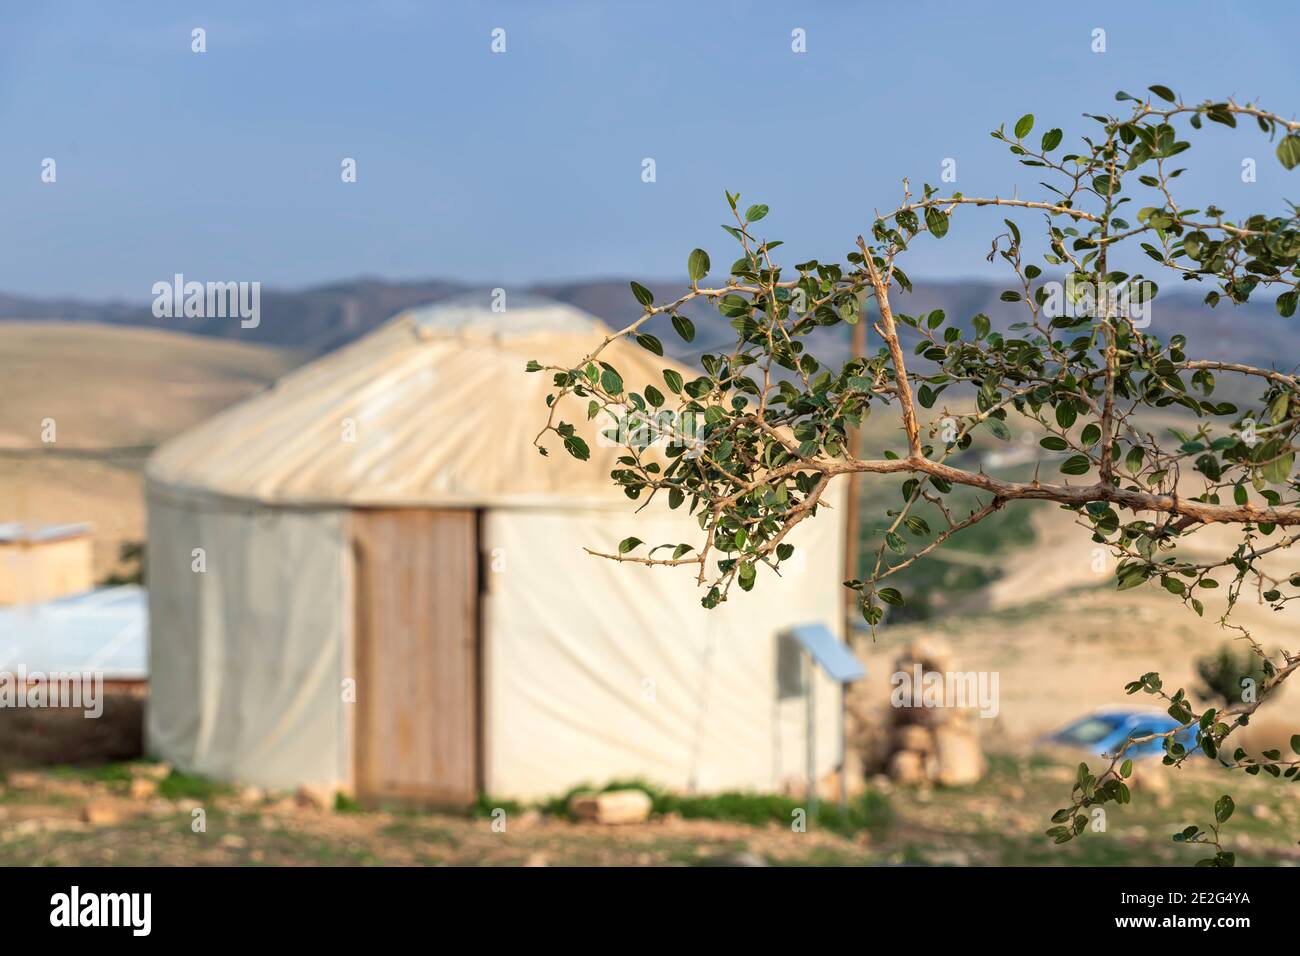 Blackthorn branches with thorns and leaves on blurred background of yurt and hills. Judean Desert. Israel Stock Photo